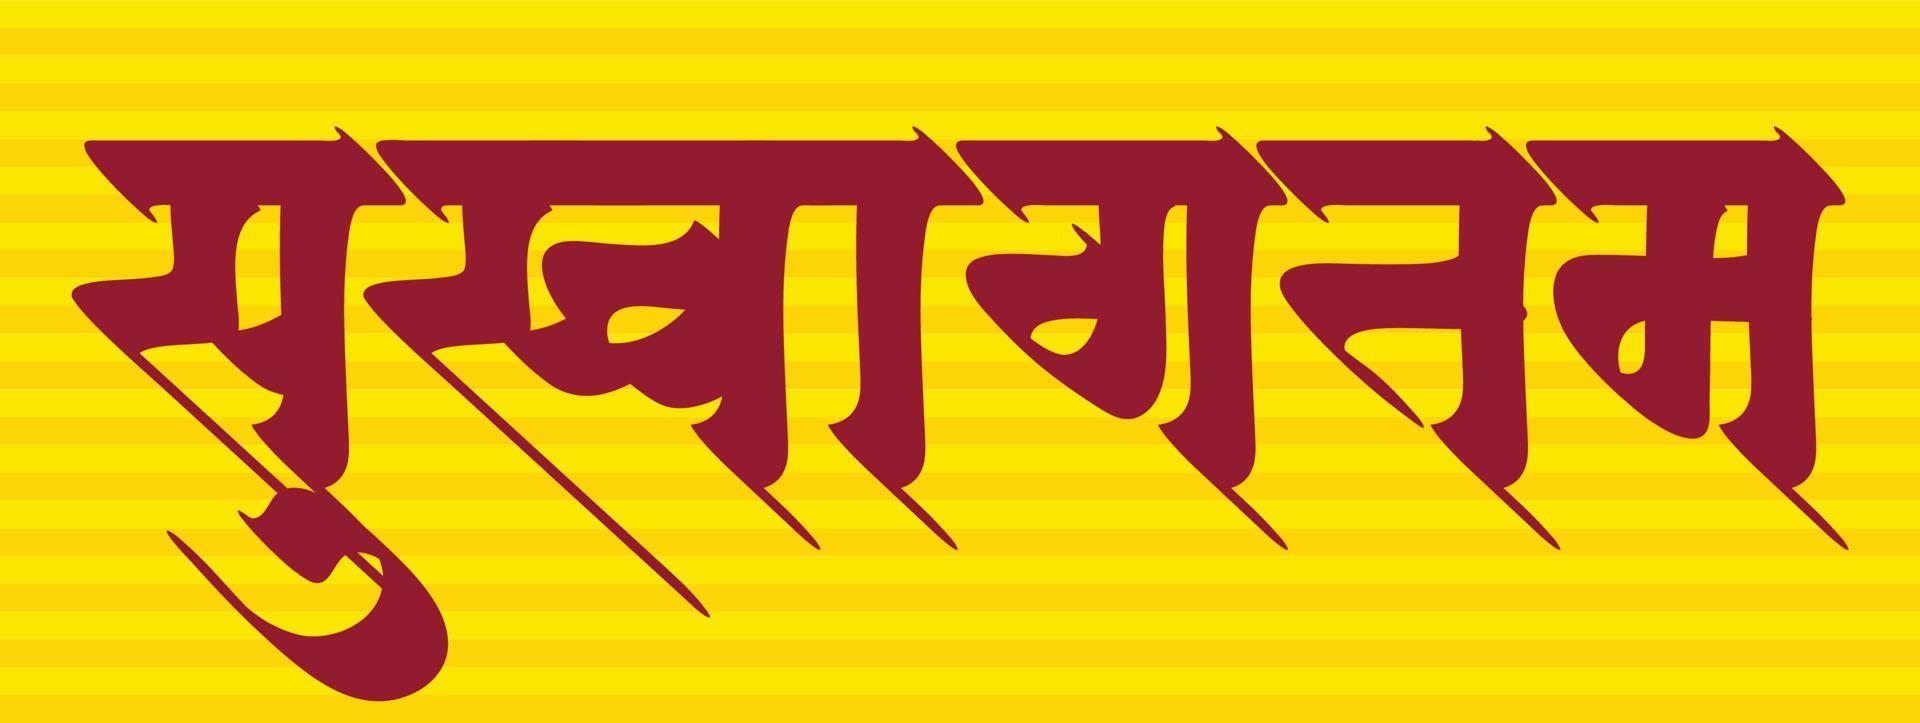 Swagat' or 'Swagatam' means welcome in Indian language Hindi and Marathi, the expressive word in Indian language vector